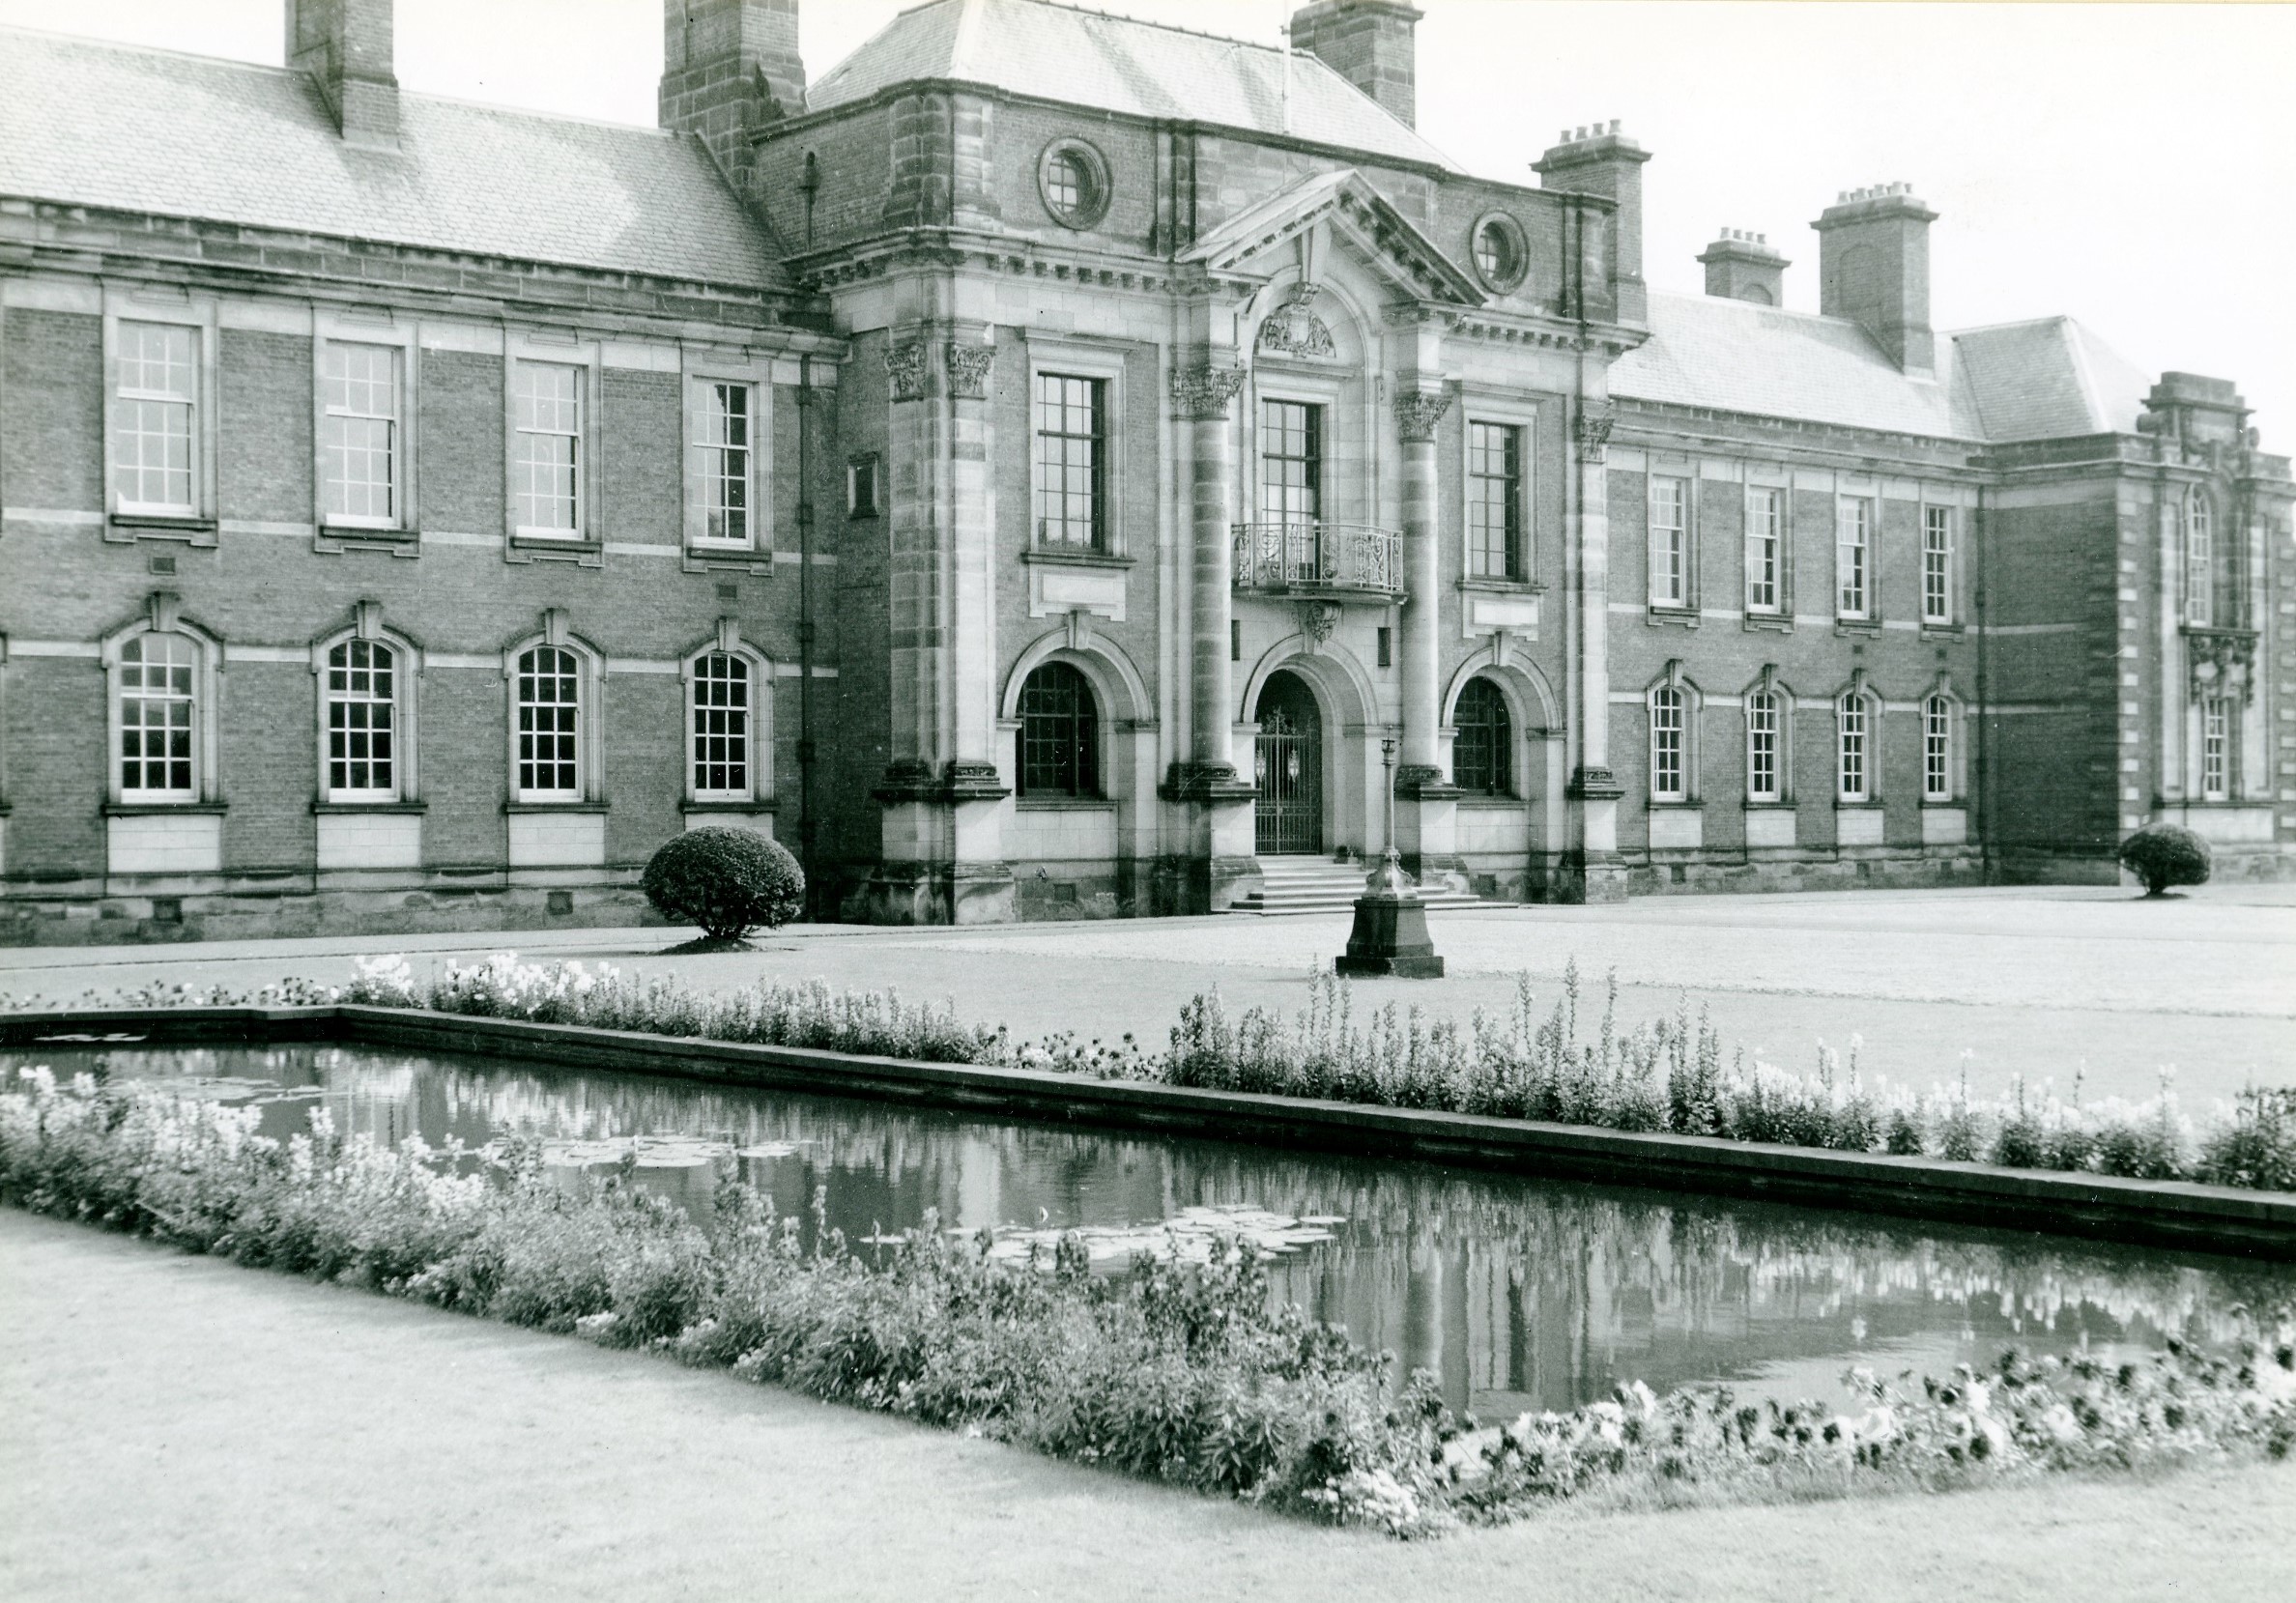 County Hall in Northallerton was completed in 1905 on the site of the racecourses grandstand